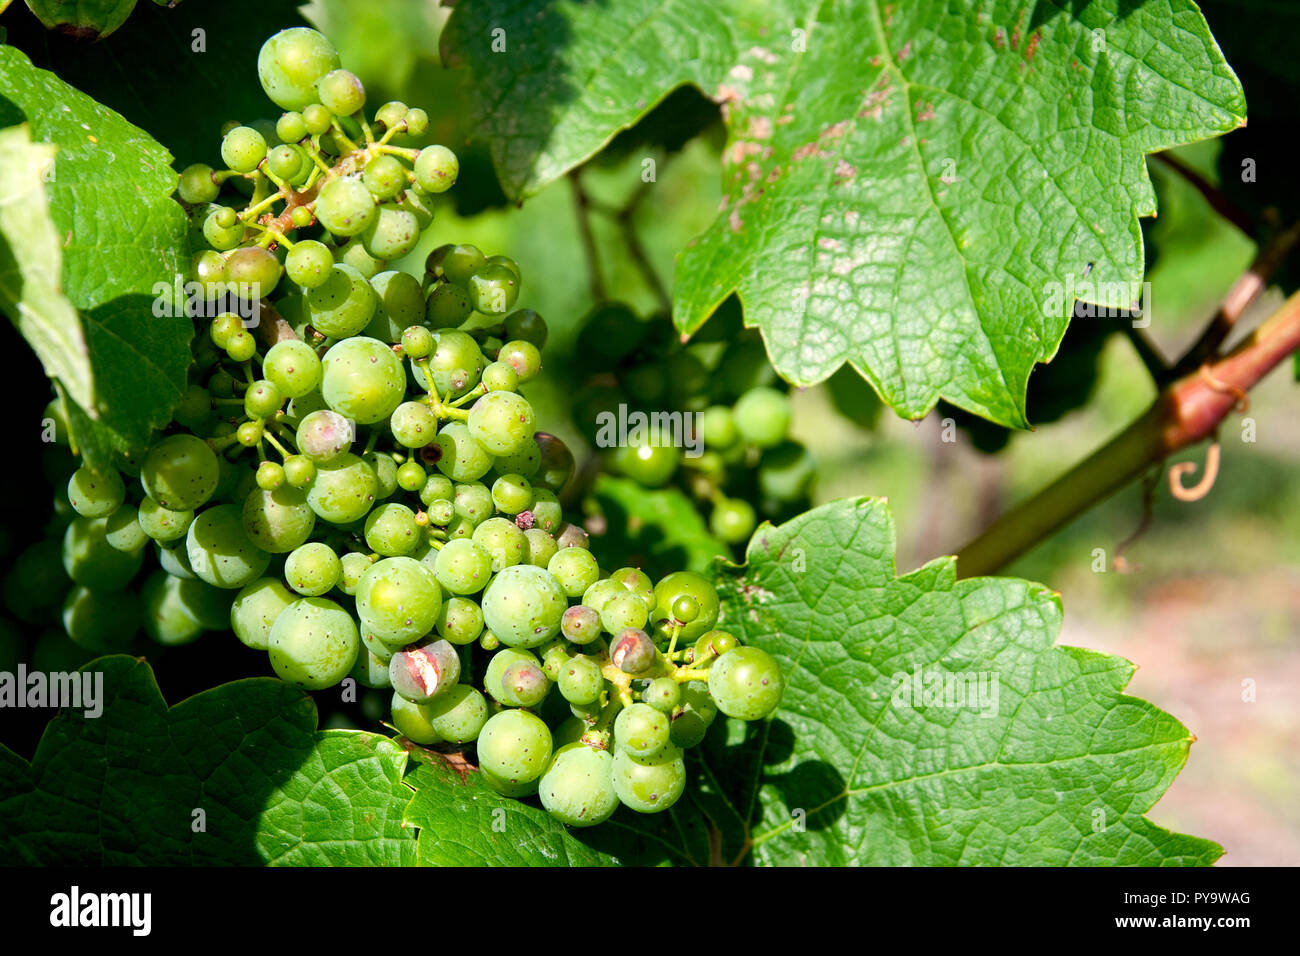 Vineyards - growing grapes in the countryside Stock Photo